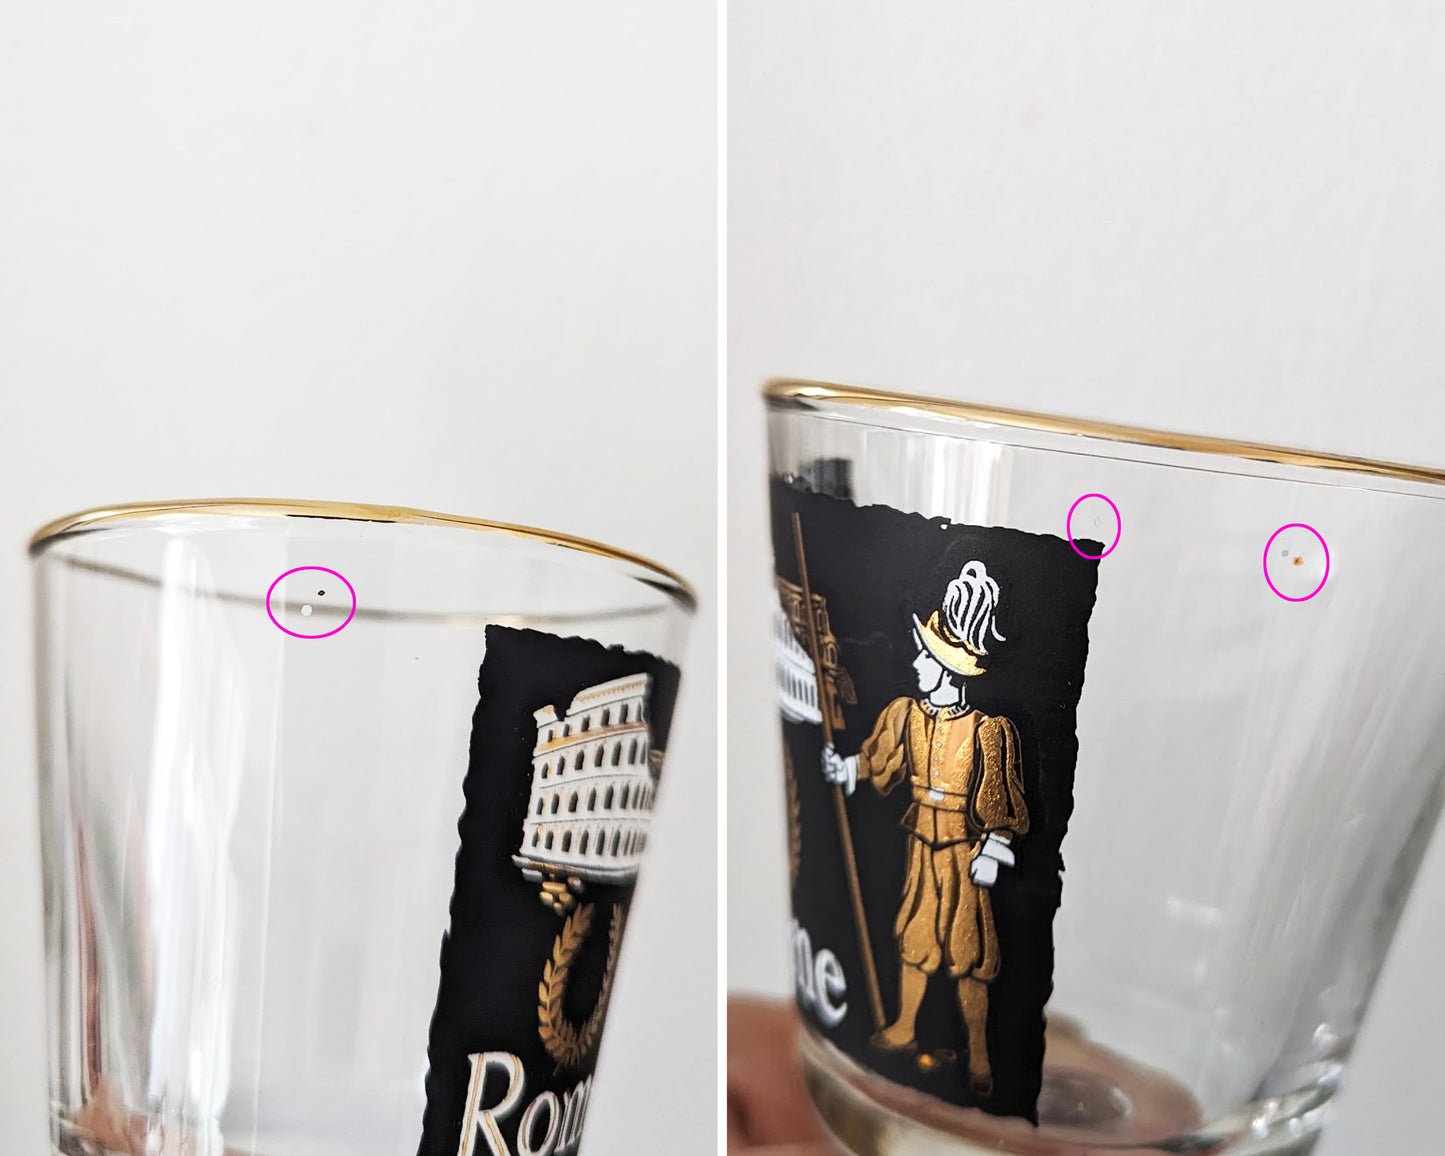 Some small factory flaws on the Rome glass which included extra paint spots and  a bubble in the glass